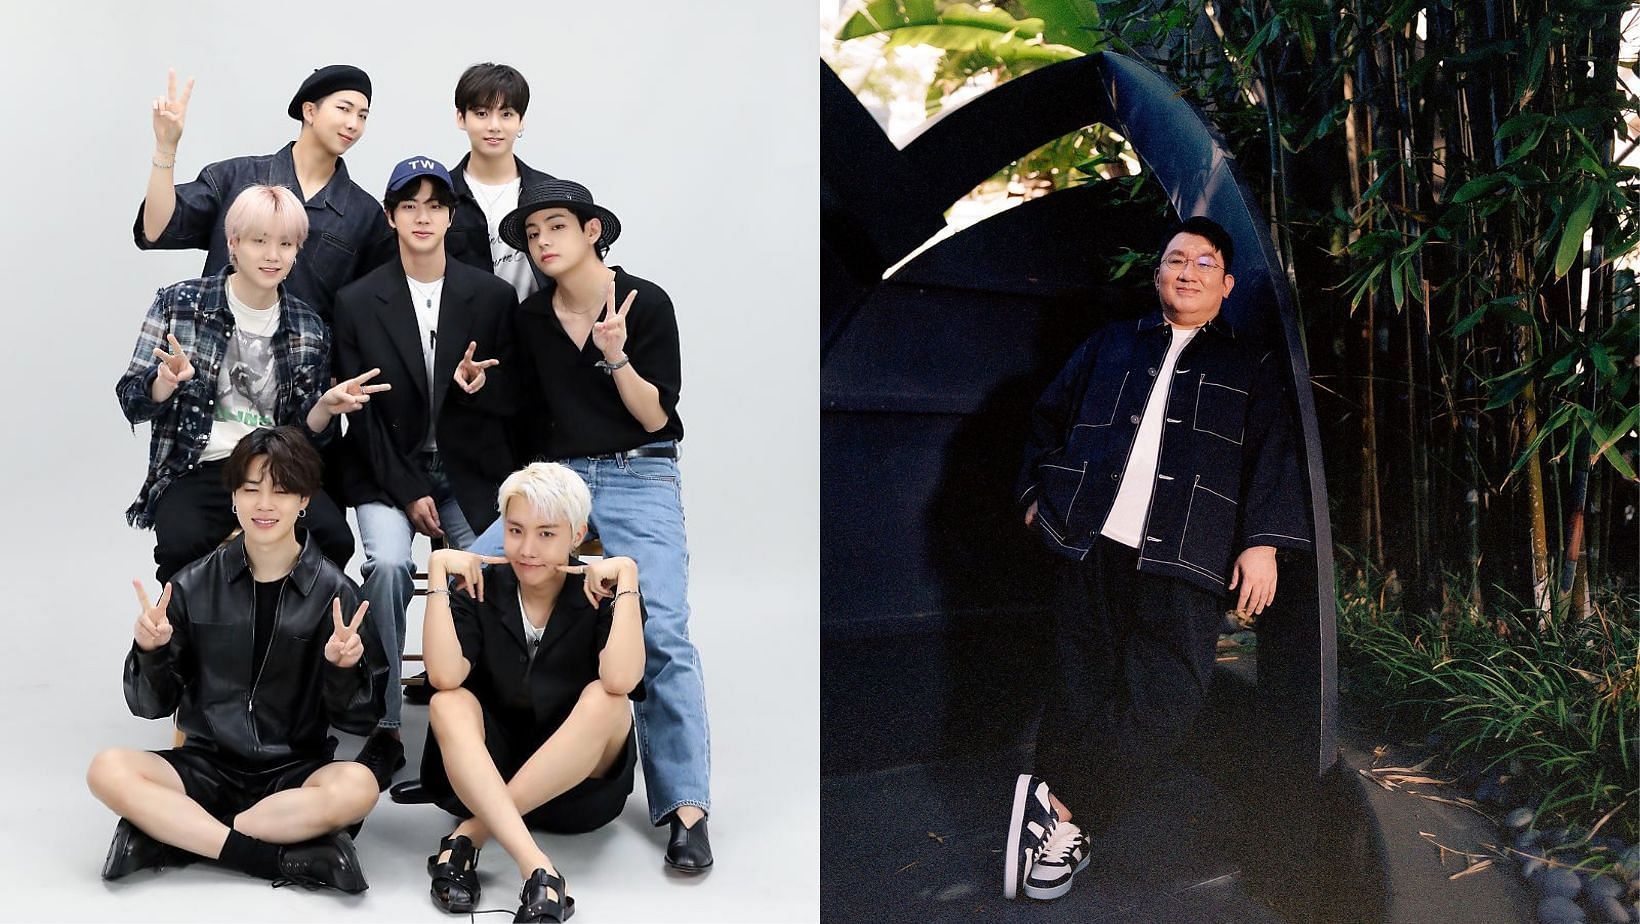 Featuring BTS (L) and Bang Si-Hyuk, Chairman of HYBE (R). (Images via X/@setiogi and @BIGHIT_MUSIC)